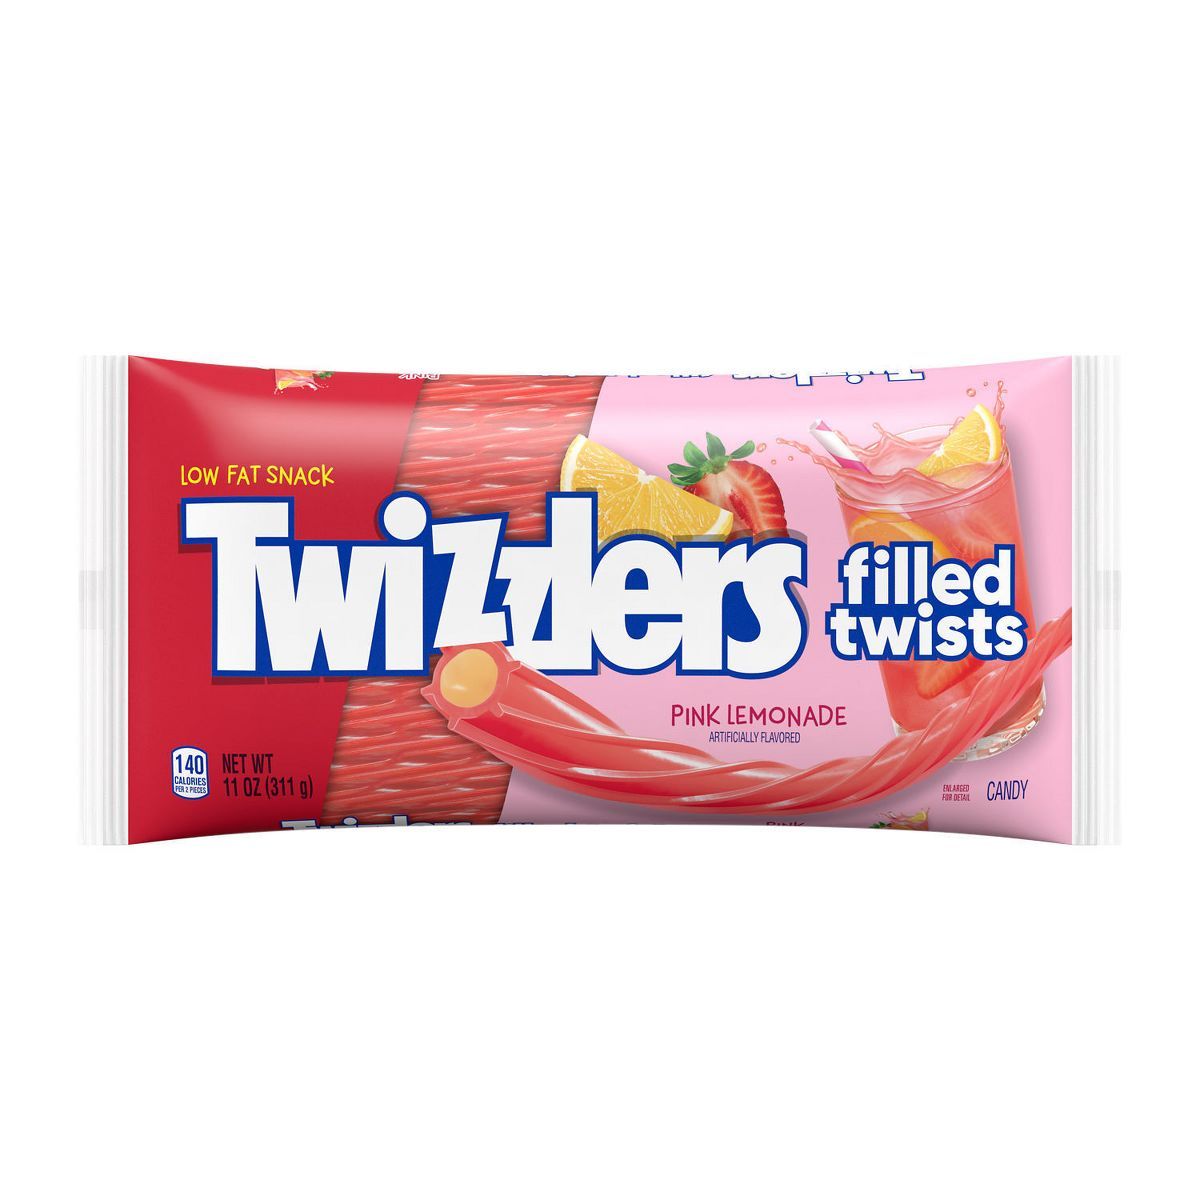 Twizzlers Pink Lemonade Flavored Filled Twists Candy - 11oz | Target